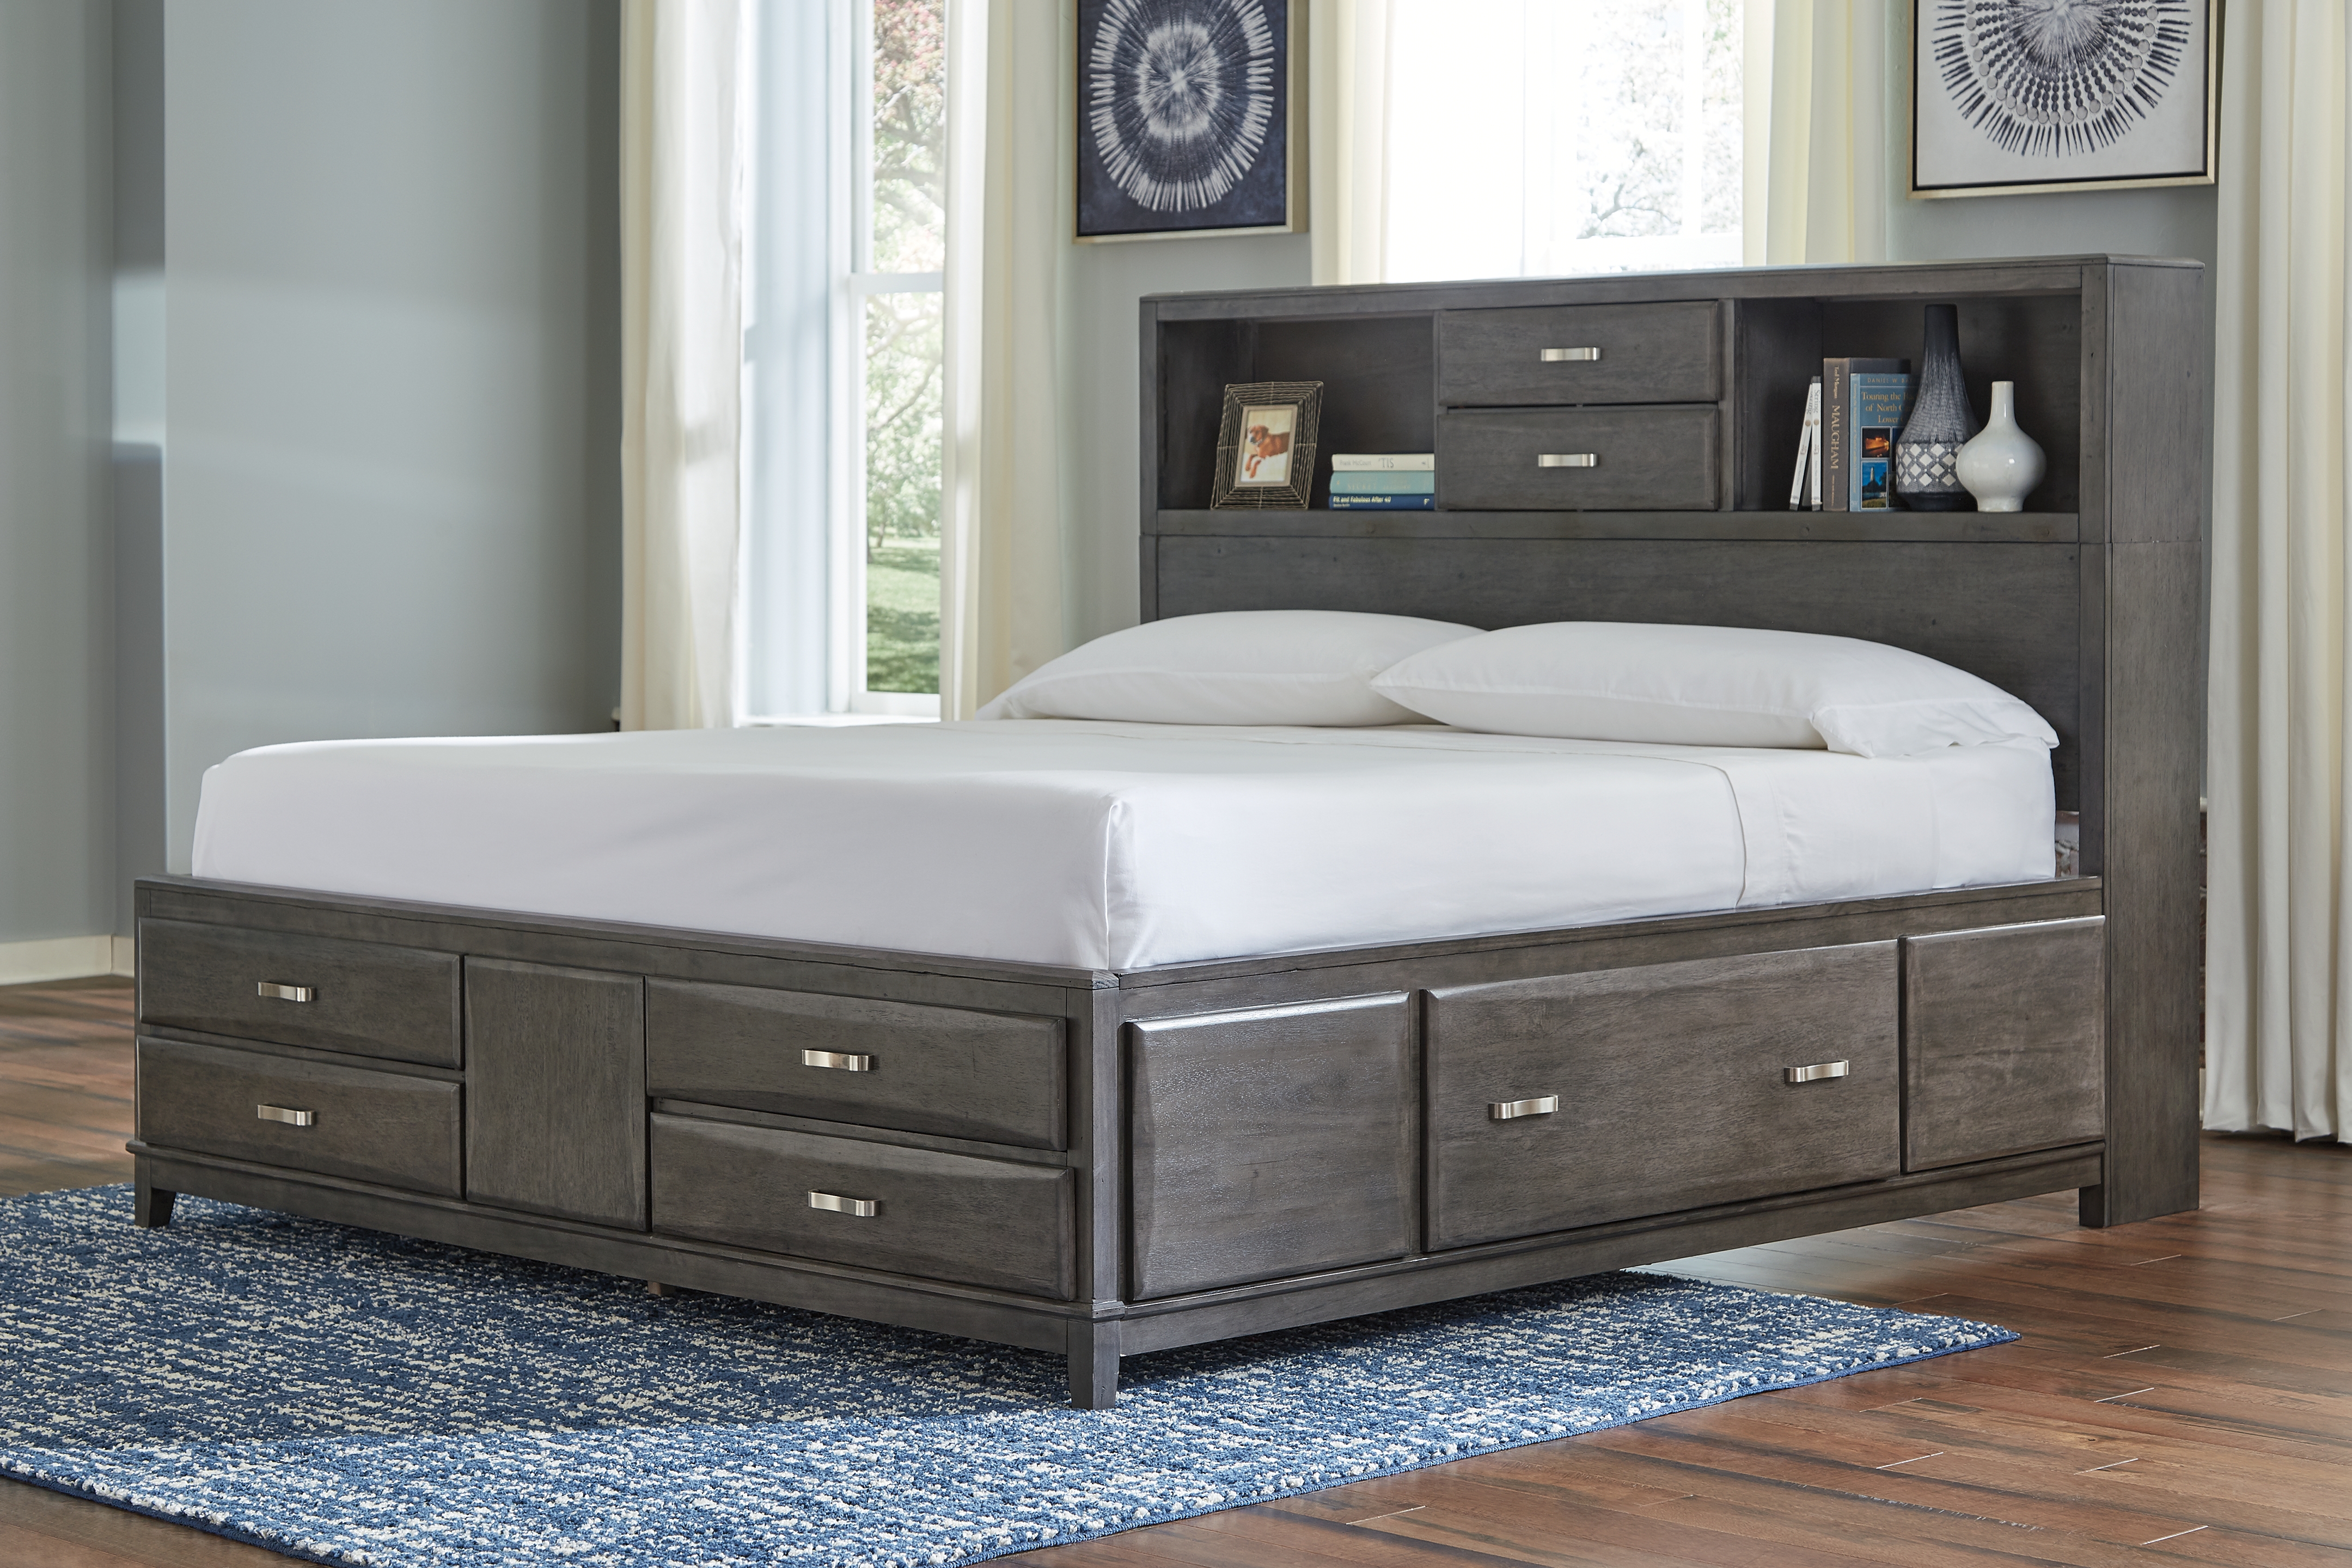 will california king mattress fit king bed frame